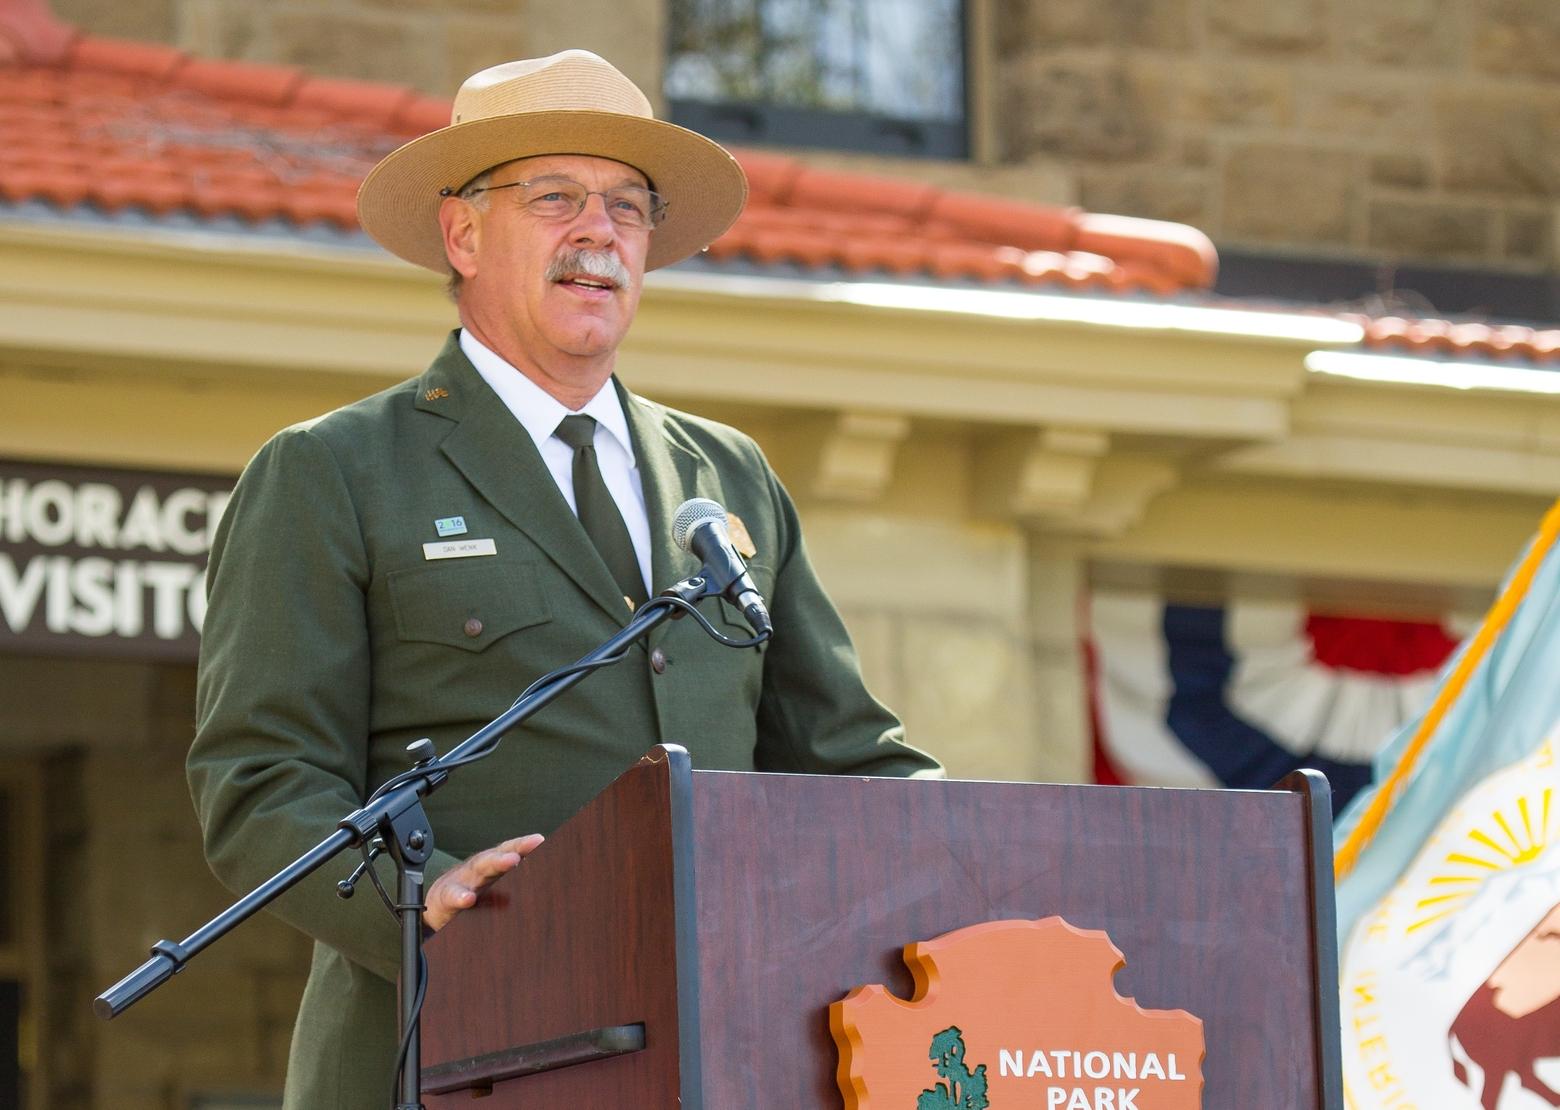 Dan Wenk, who served as superintendent of Yellowstone National Park from 2011-2018, addresses a crowd at the Albright Visitor Center in 2015. "Managing Yellowstone National Park was the greatest honor and privilege of my life," he says. Photo by Neal Herbert/NPS